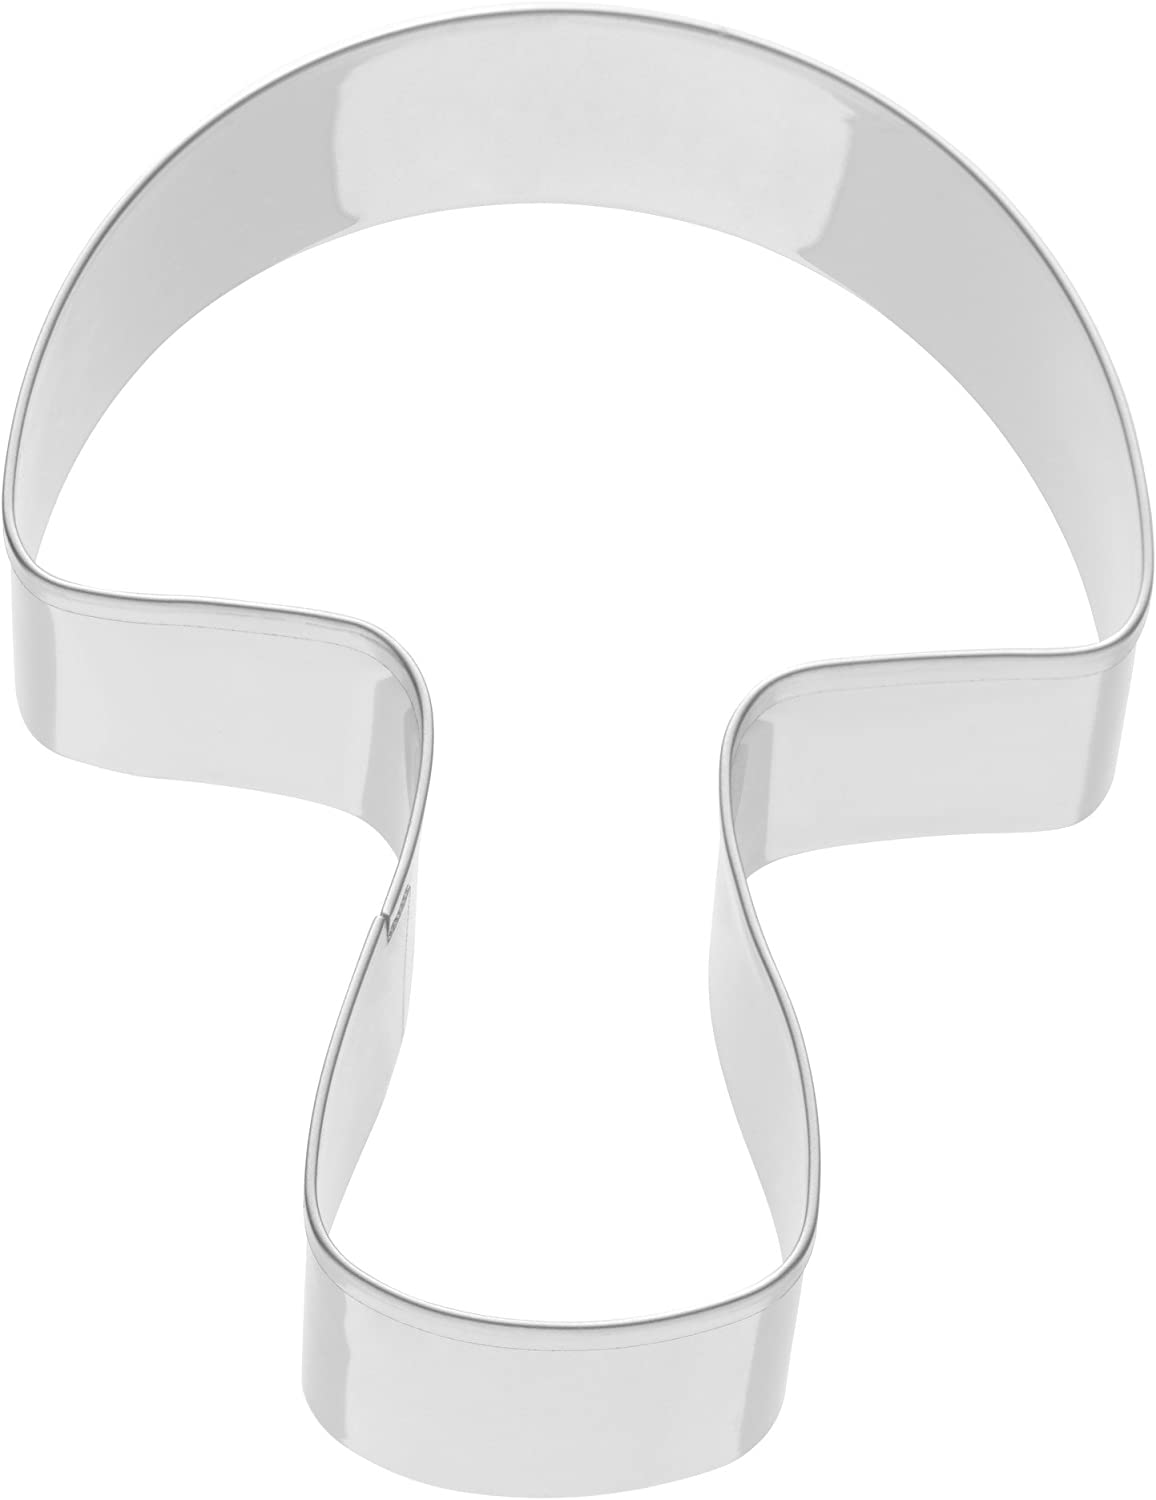 Kaiser Cookie Cutter Mushroom Congratulations Stainless Steel Cookie Cutter for Biscuits, 8 x 7 x 2.5 cm